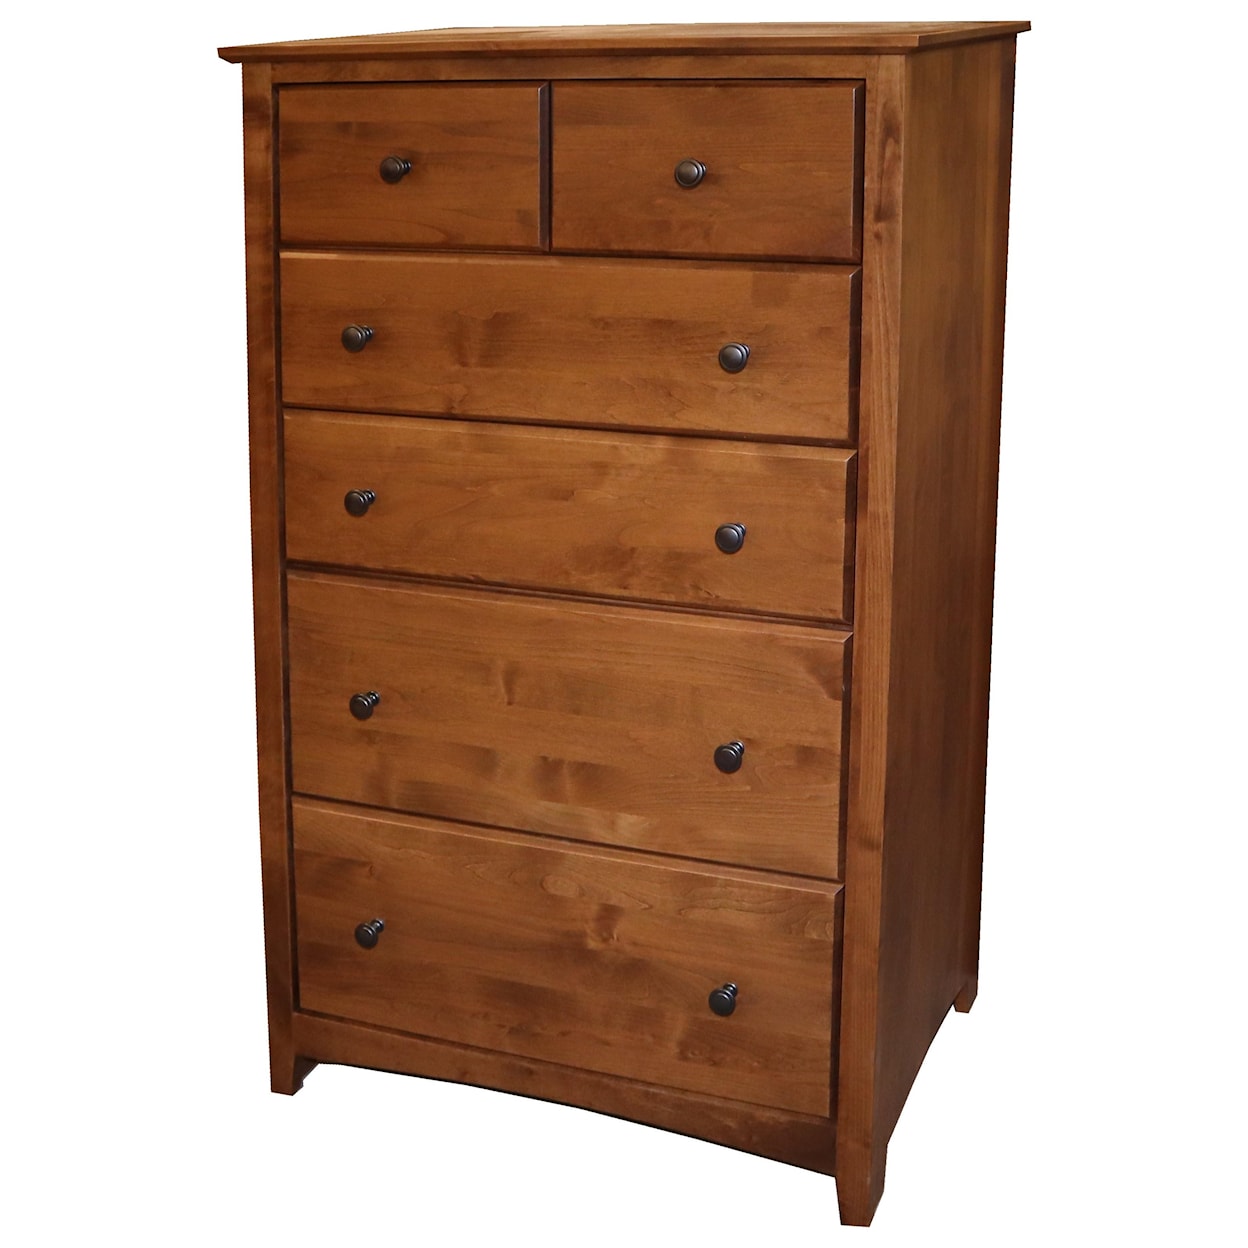 Archbold Furniture Shaker Chest of Drawers